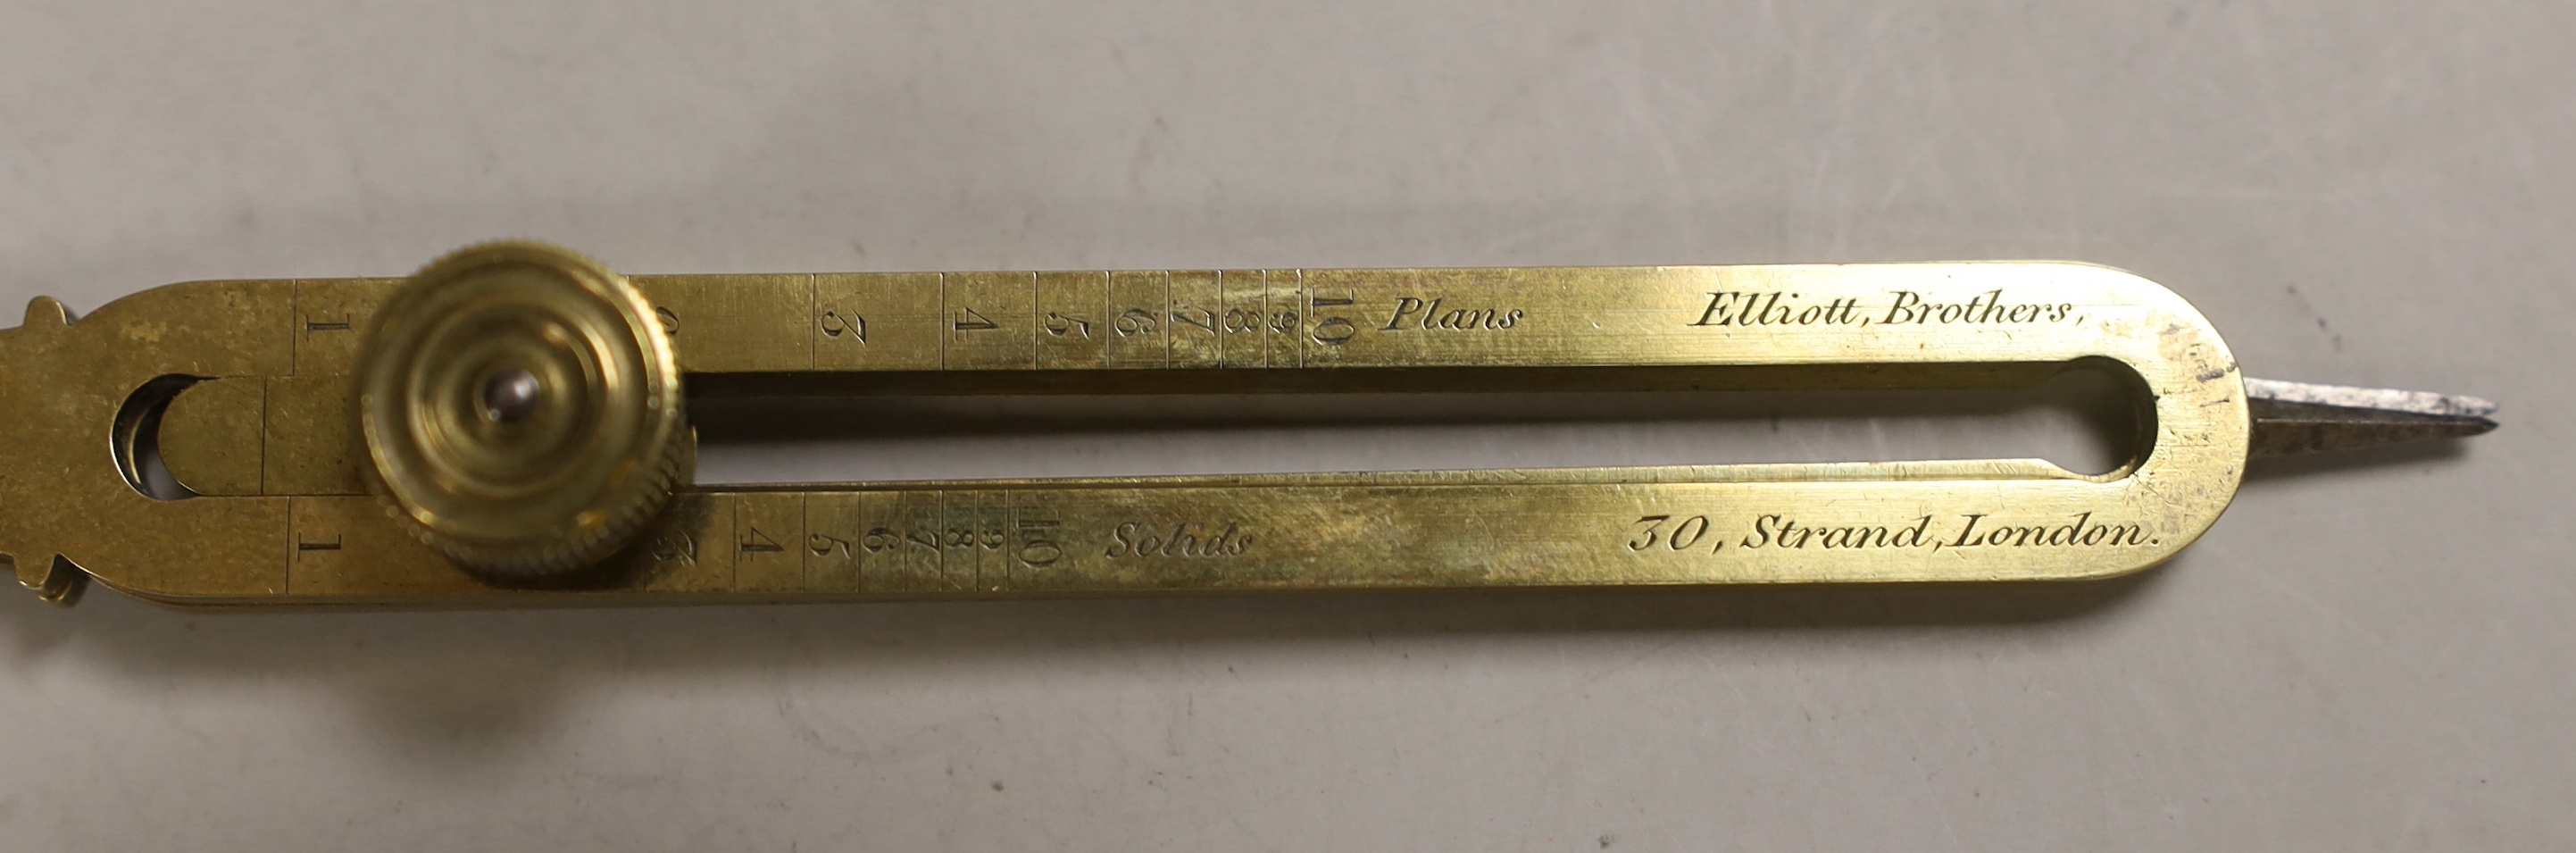 A 19th century brass and steel proportional compasses, Elliott Bros., 30 The Strand, engraved WCC, 15th Regt (East Yorks Regiment), in morocco case